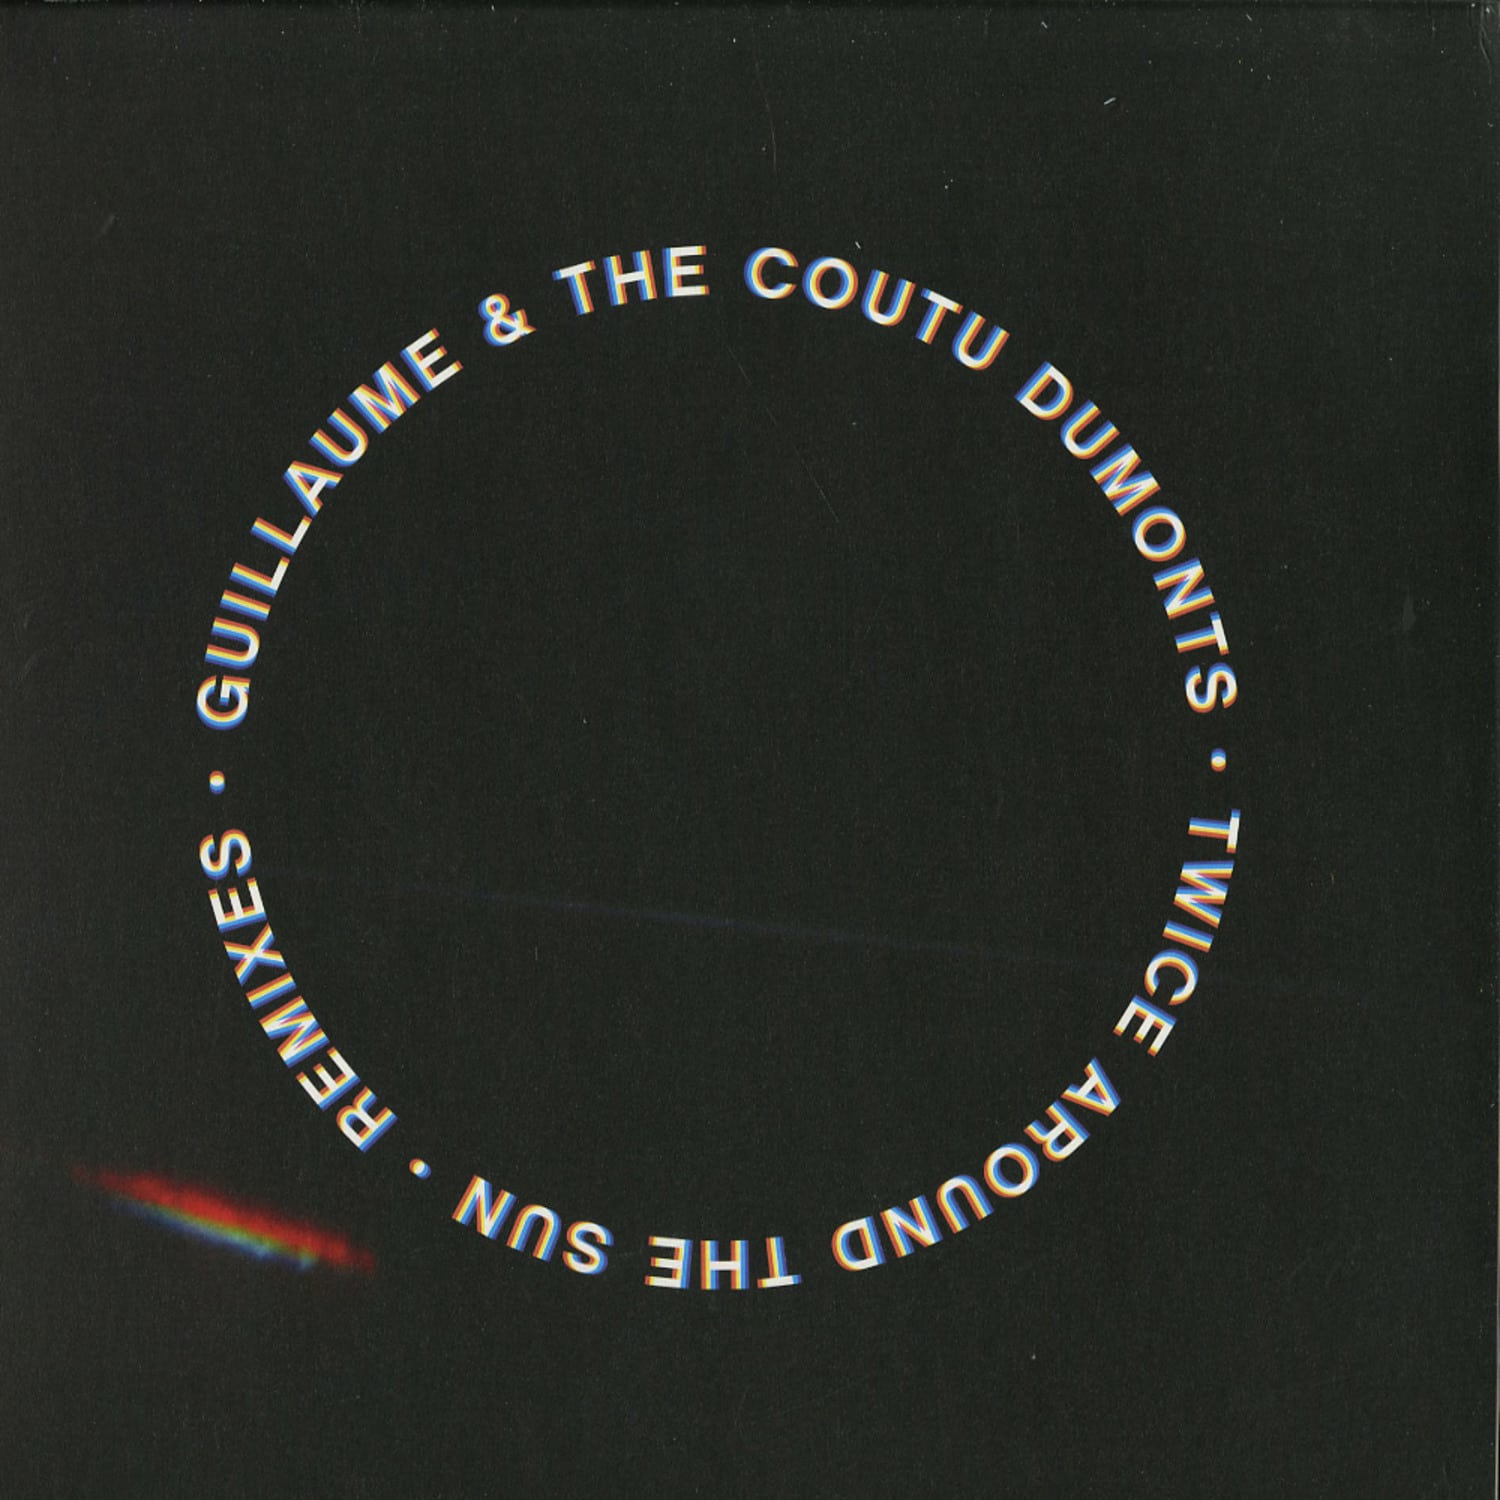 Guillaume & The Coutu Dumonts - TWICE AROUND THE SUN 